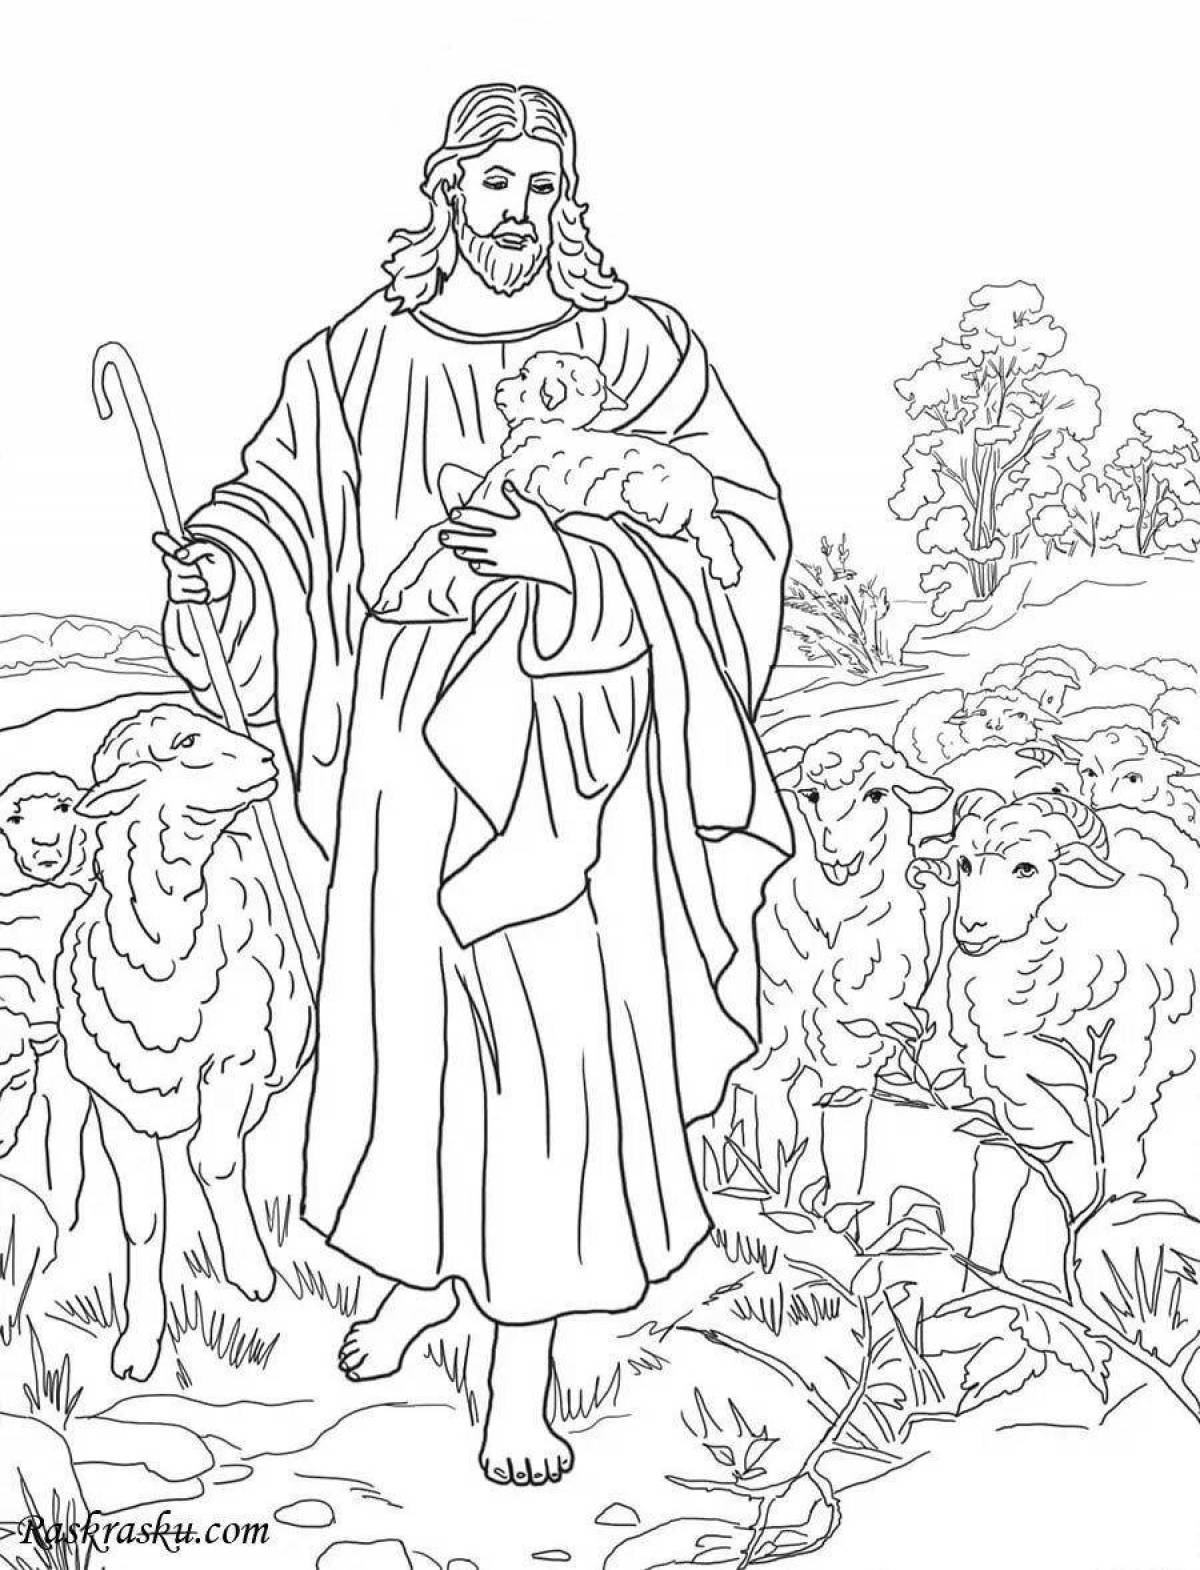 Exalted christian coloring page